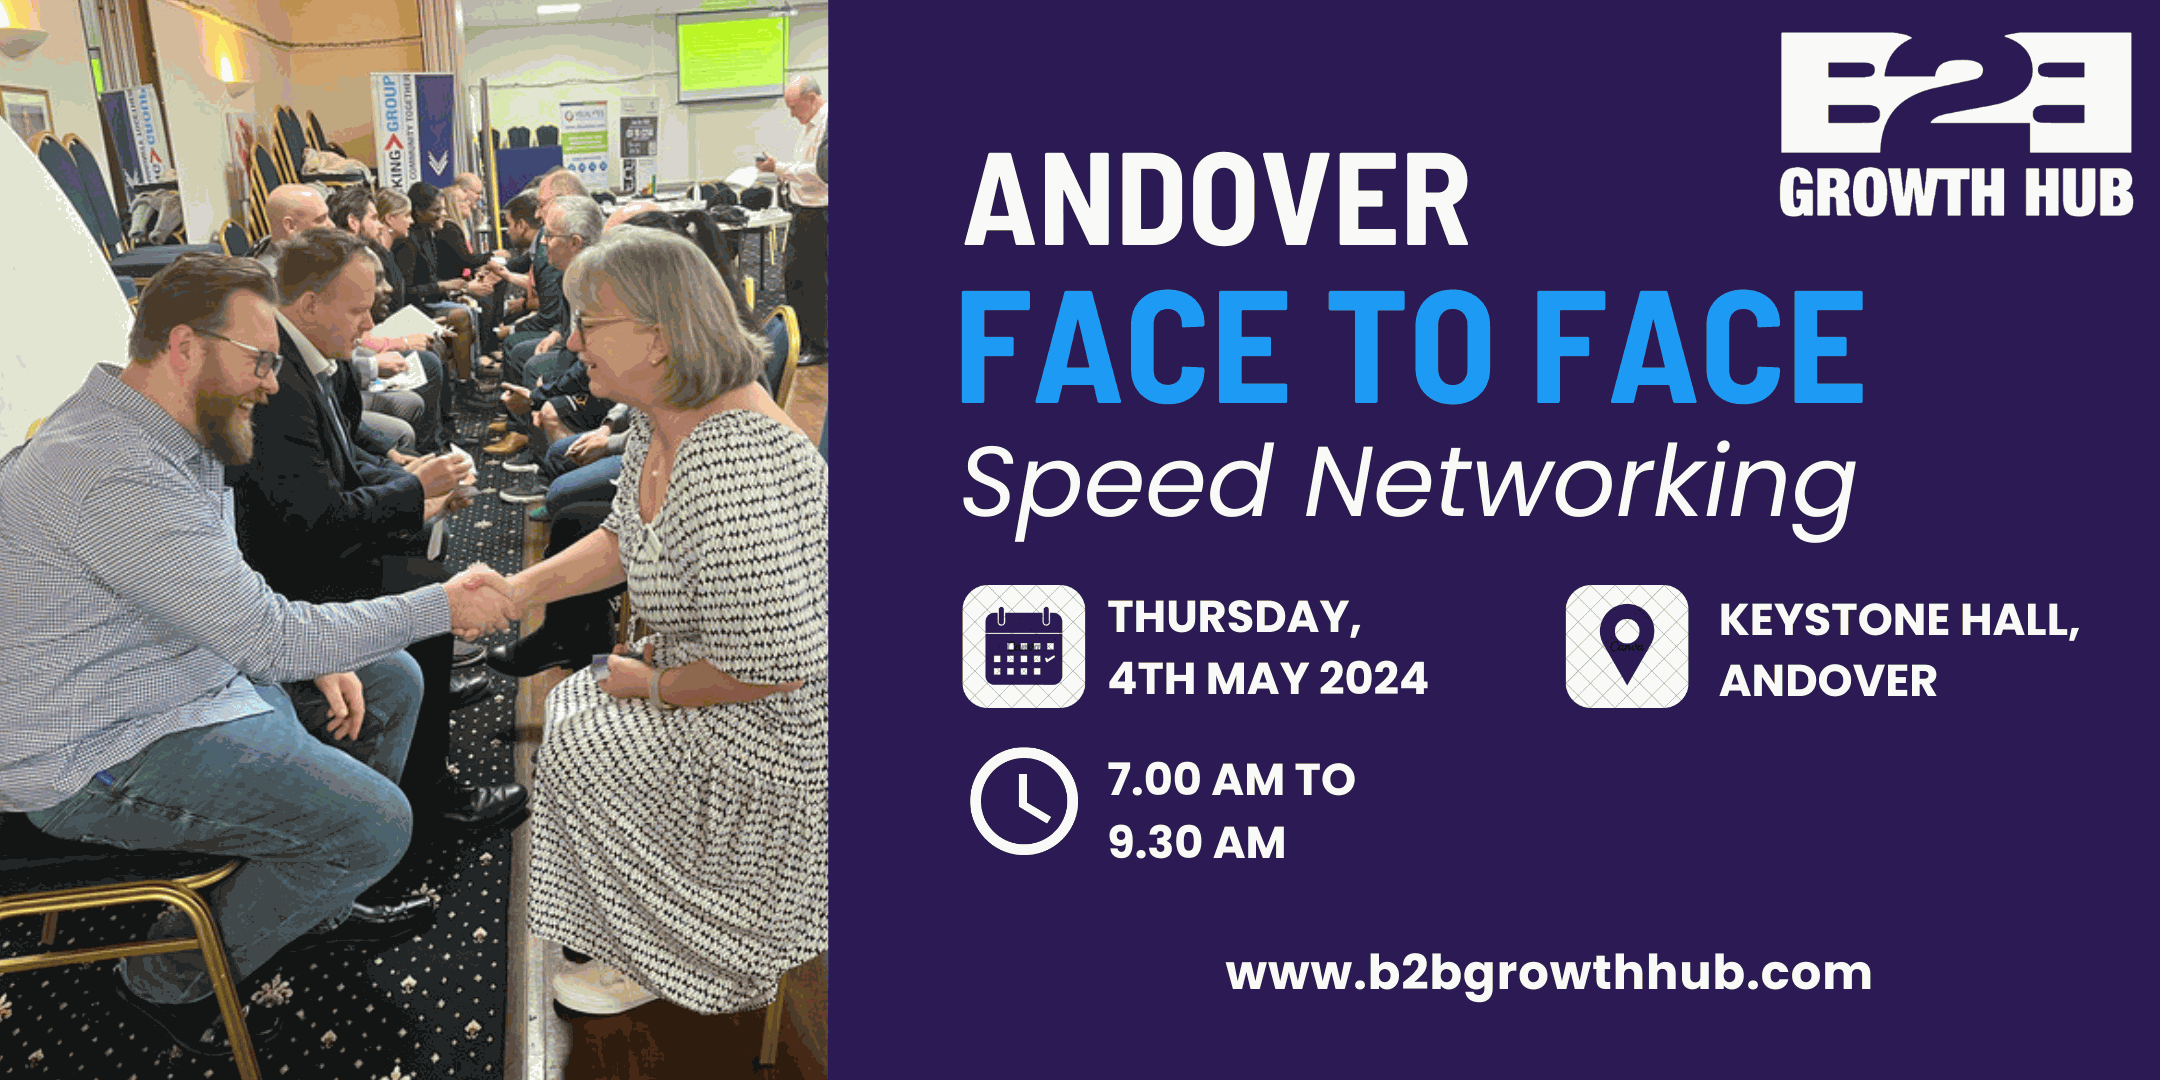 Andover Face 2 Face Morning Speed Networking - 02nd May 2024 (Cancelled)